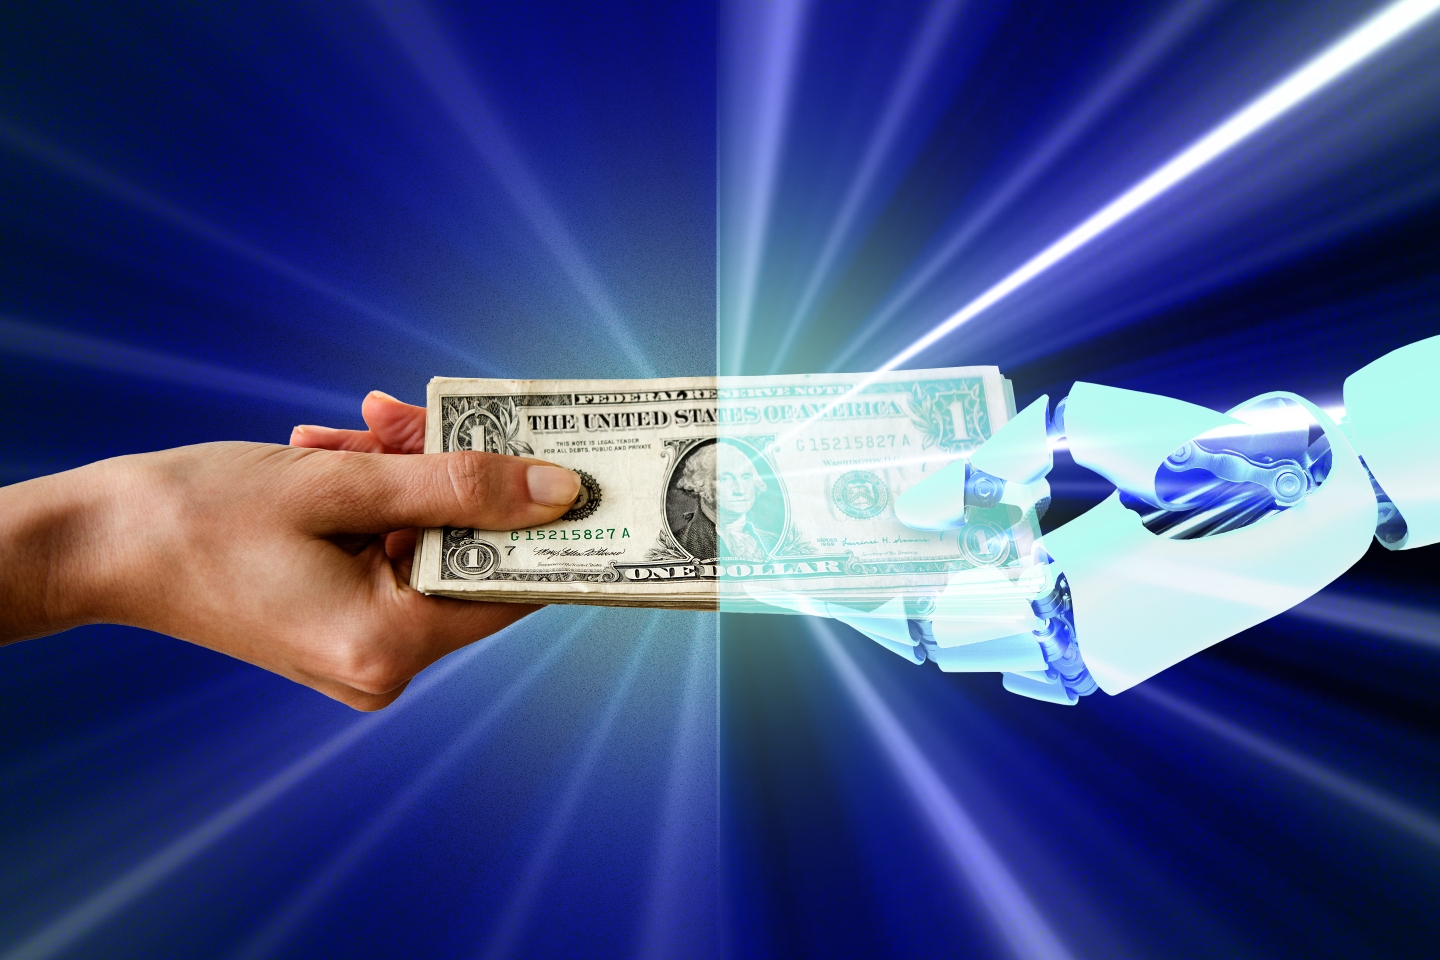 Photo illustration of a human hand taking a stack of money from a robotic hand that represent artificial intelligence.